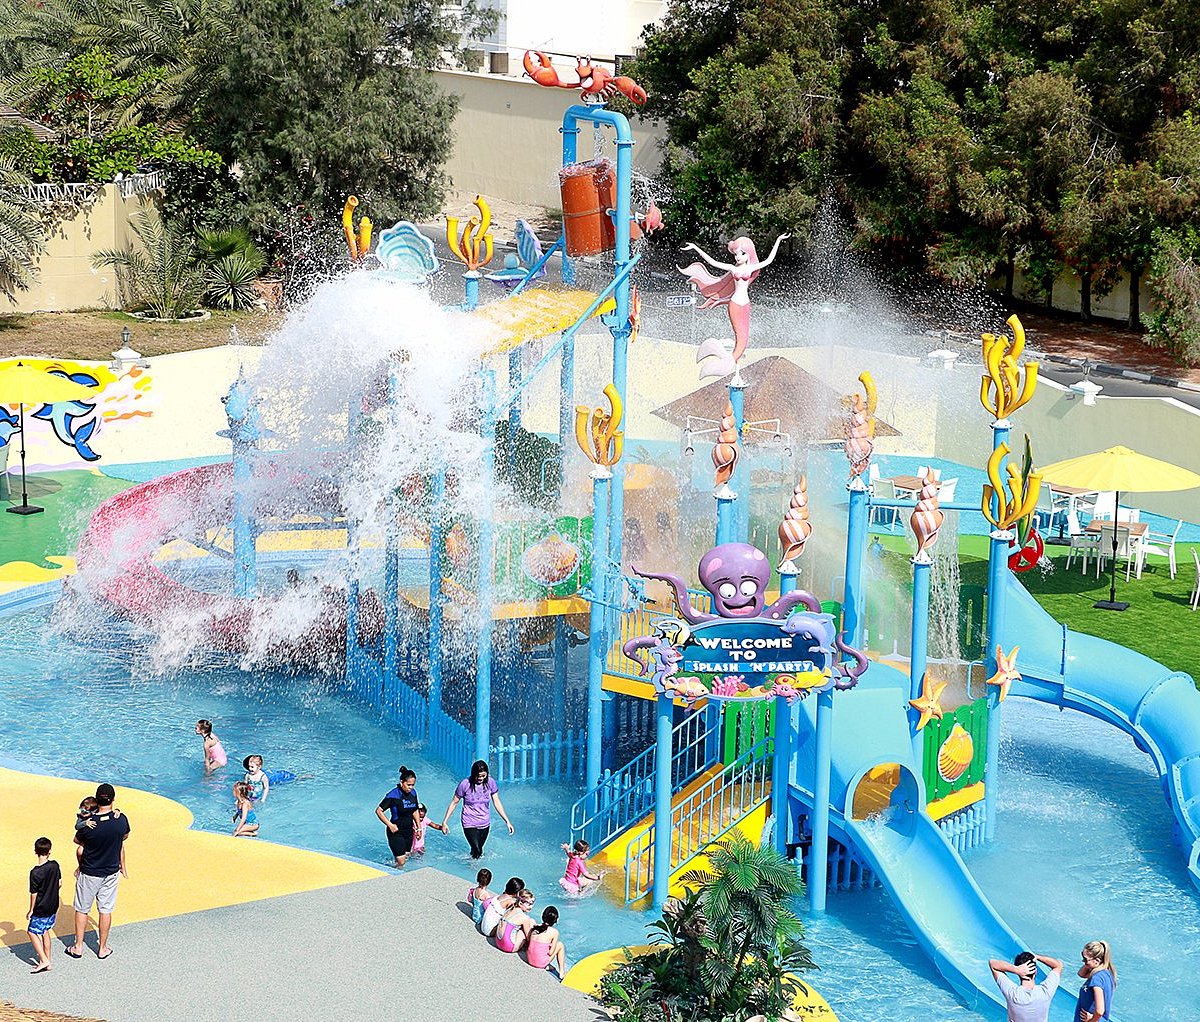 Splash Pad Waterpark at The Green Plane is one of the most memorable waterparks in Dubia